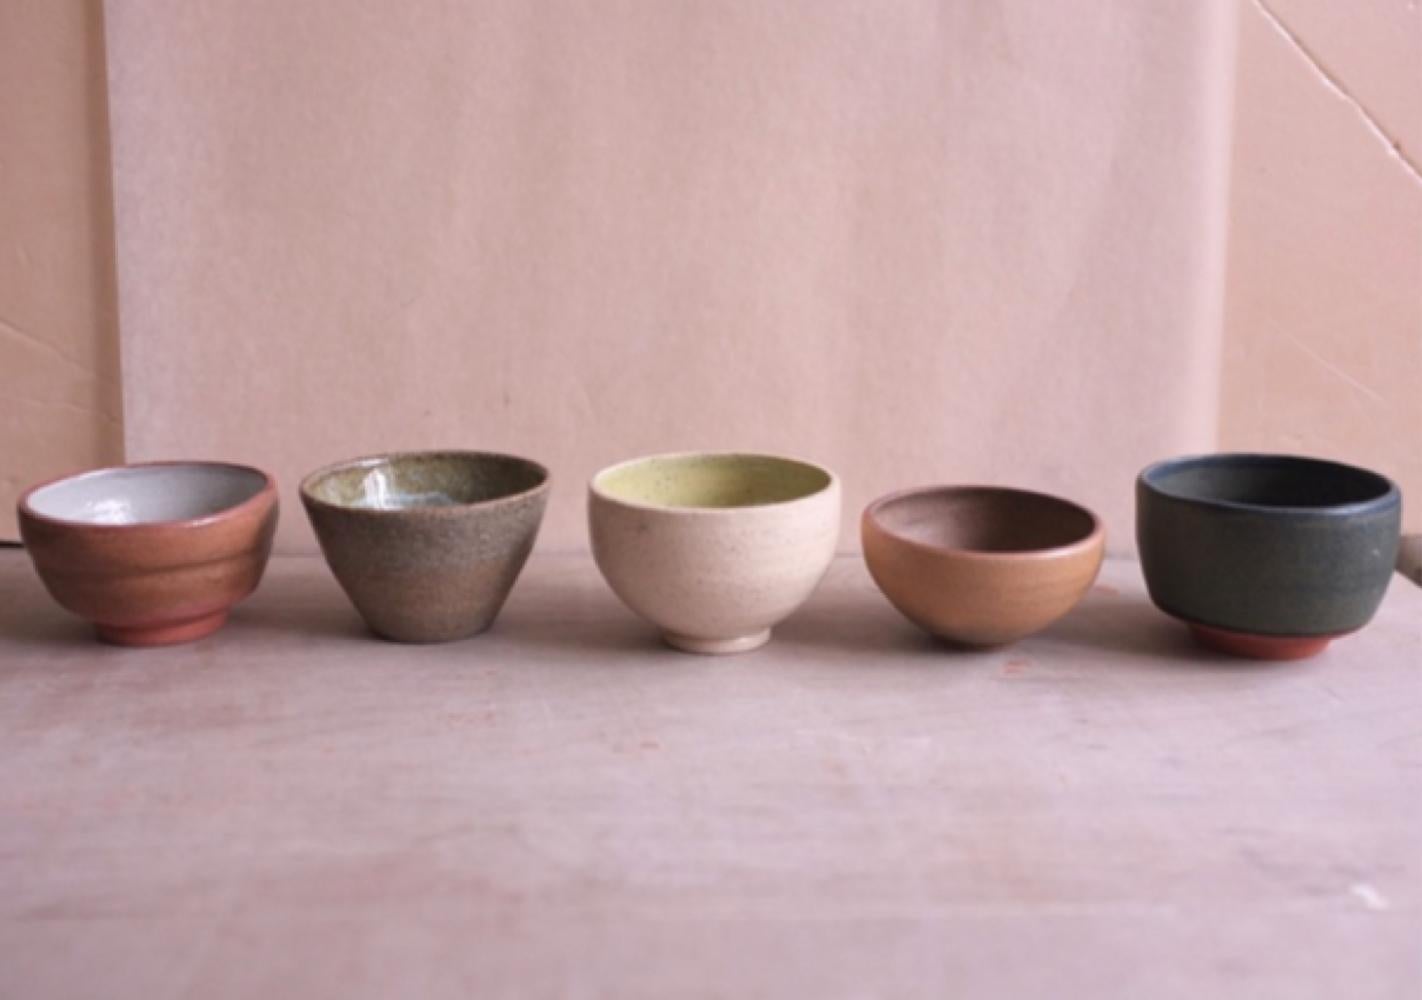 ?Title : 
- red clay and pale blue + sheer glaze
- grey speckled clay and pastel green + sheer glaze - white speckled clay and lime green + sheer glaze - ochre brown clay and matte cream + sheer glaze
- red clay and matte midnight blue